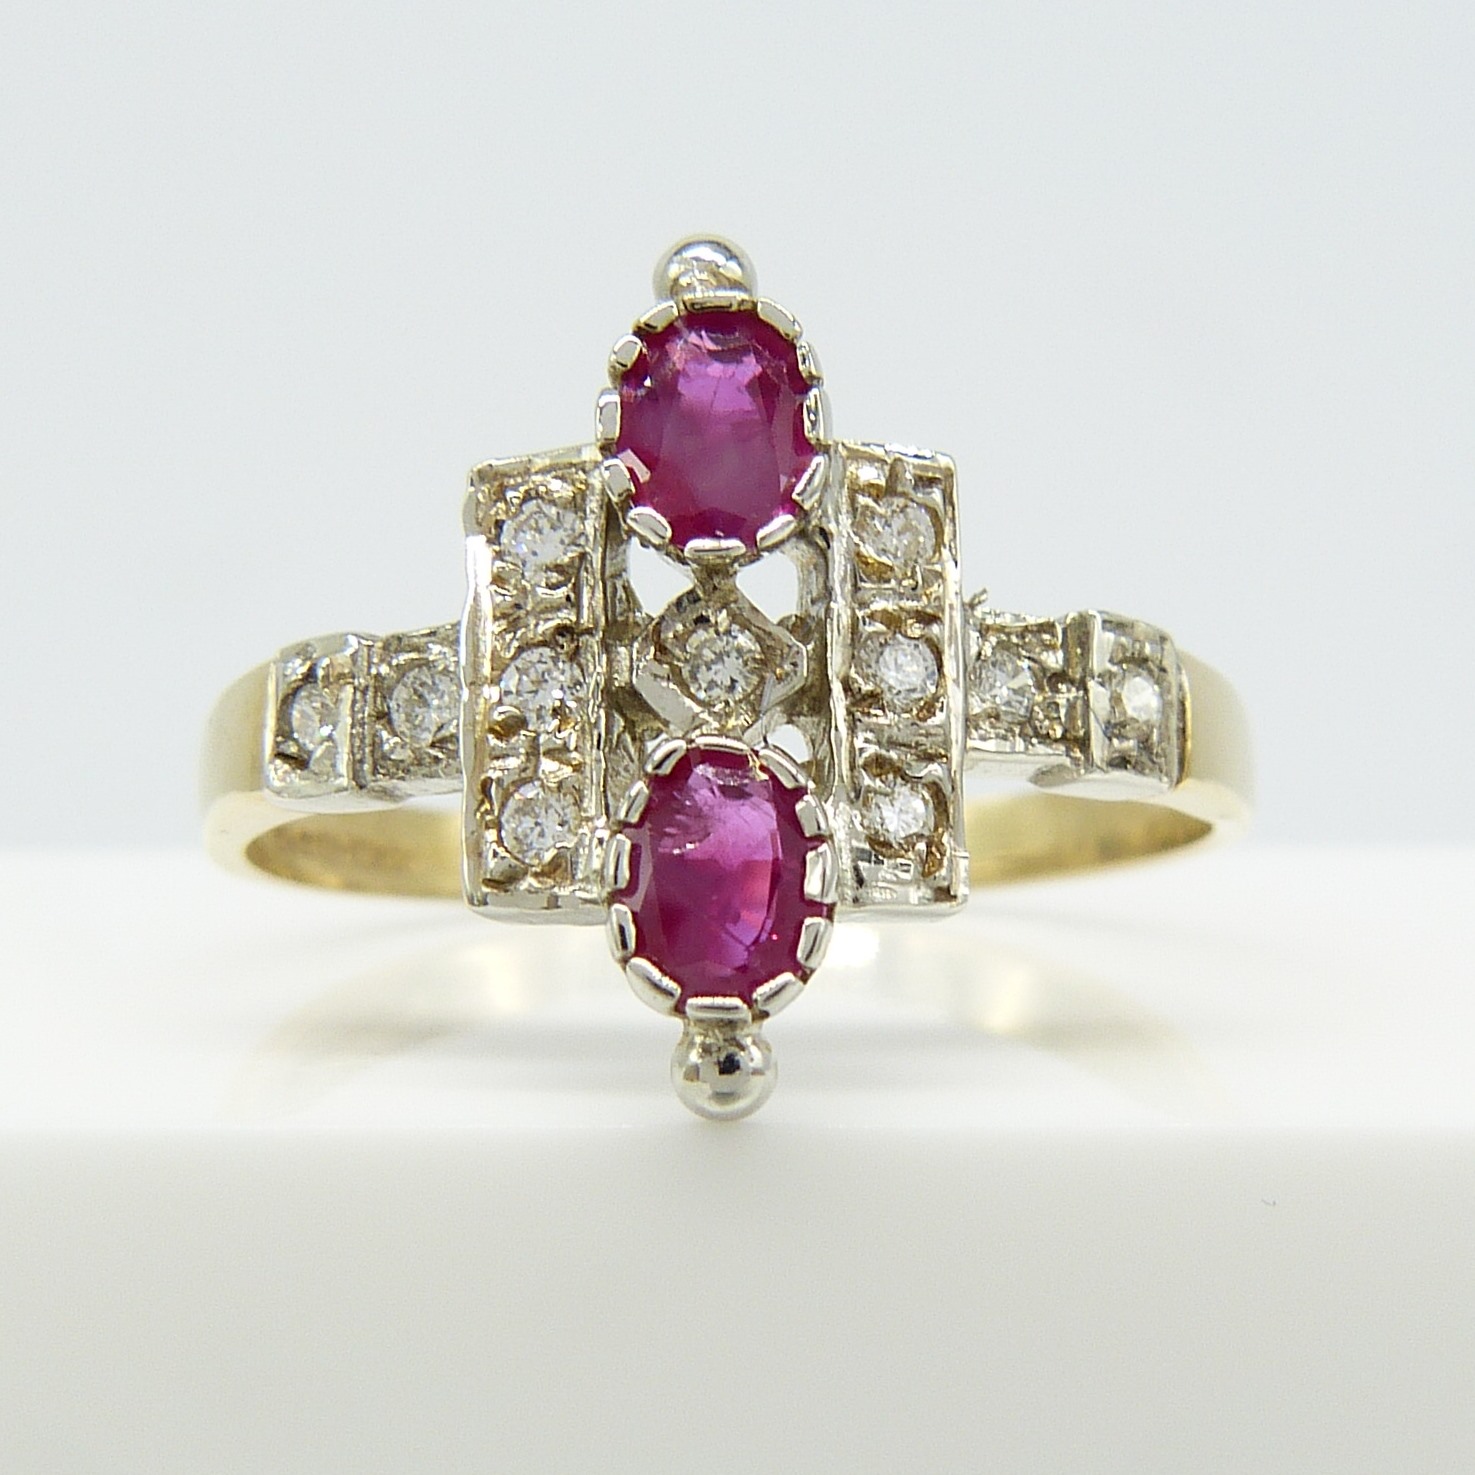 Vintage deco-inspired yellow and white gold ring set with rubies and diamonds - Image 2 of 8